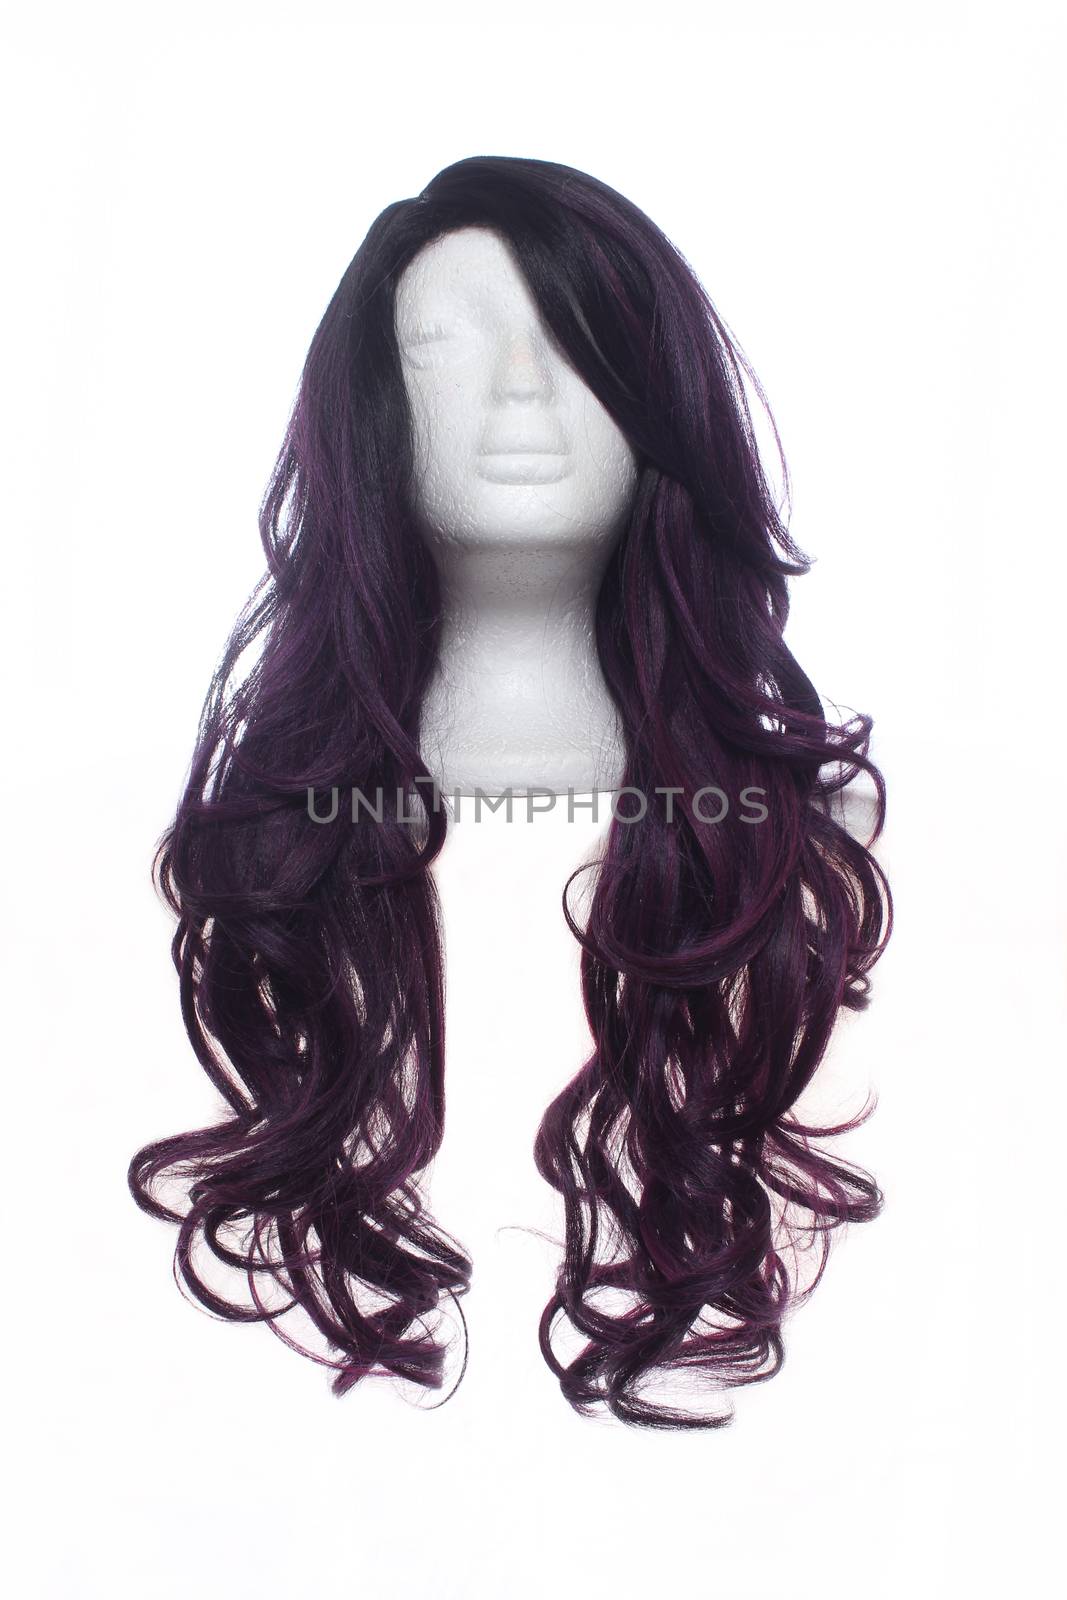 Black and Red Long Wig on Mannequin by Marti157900